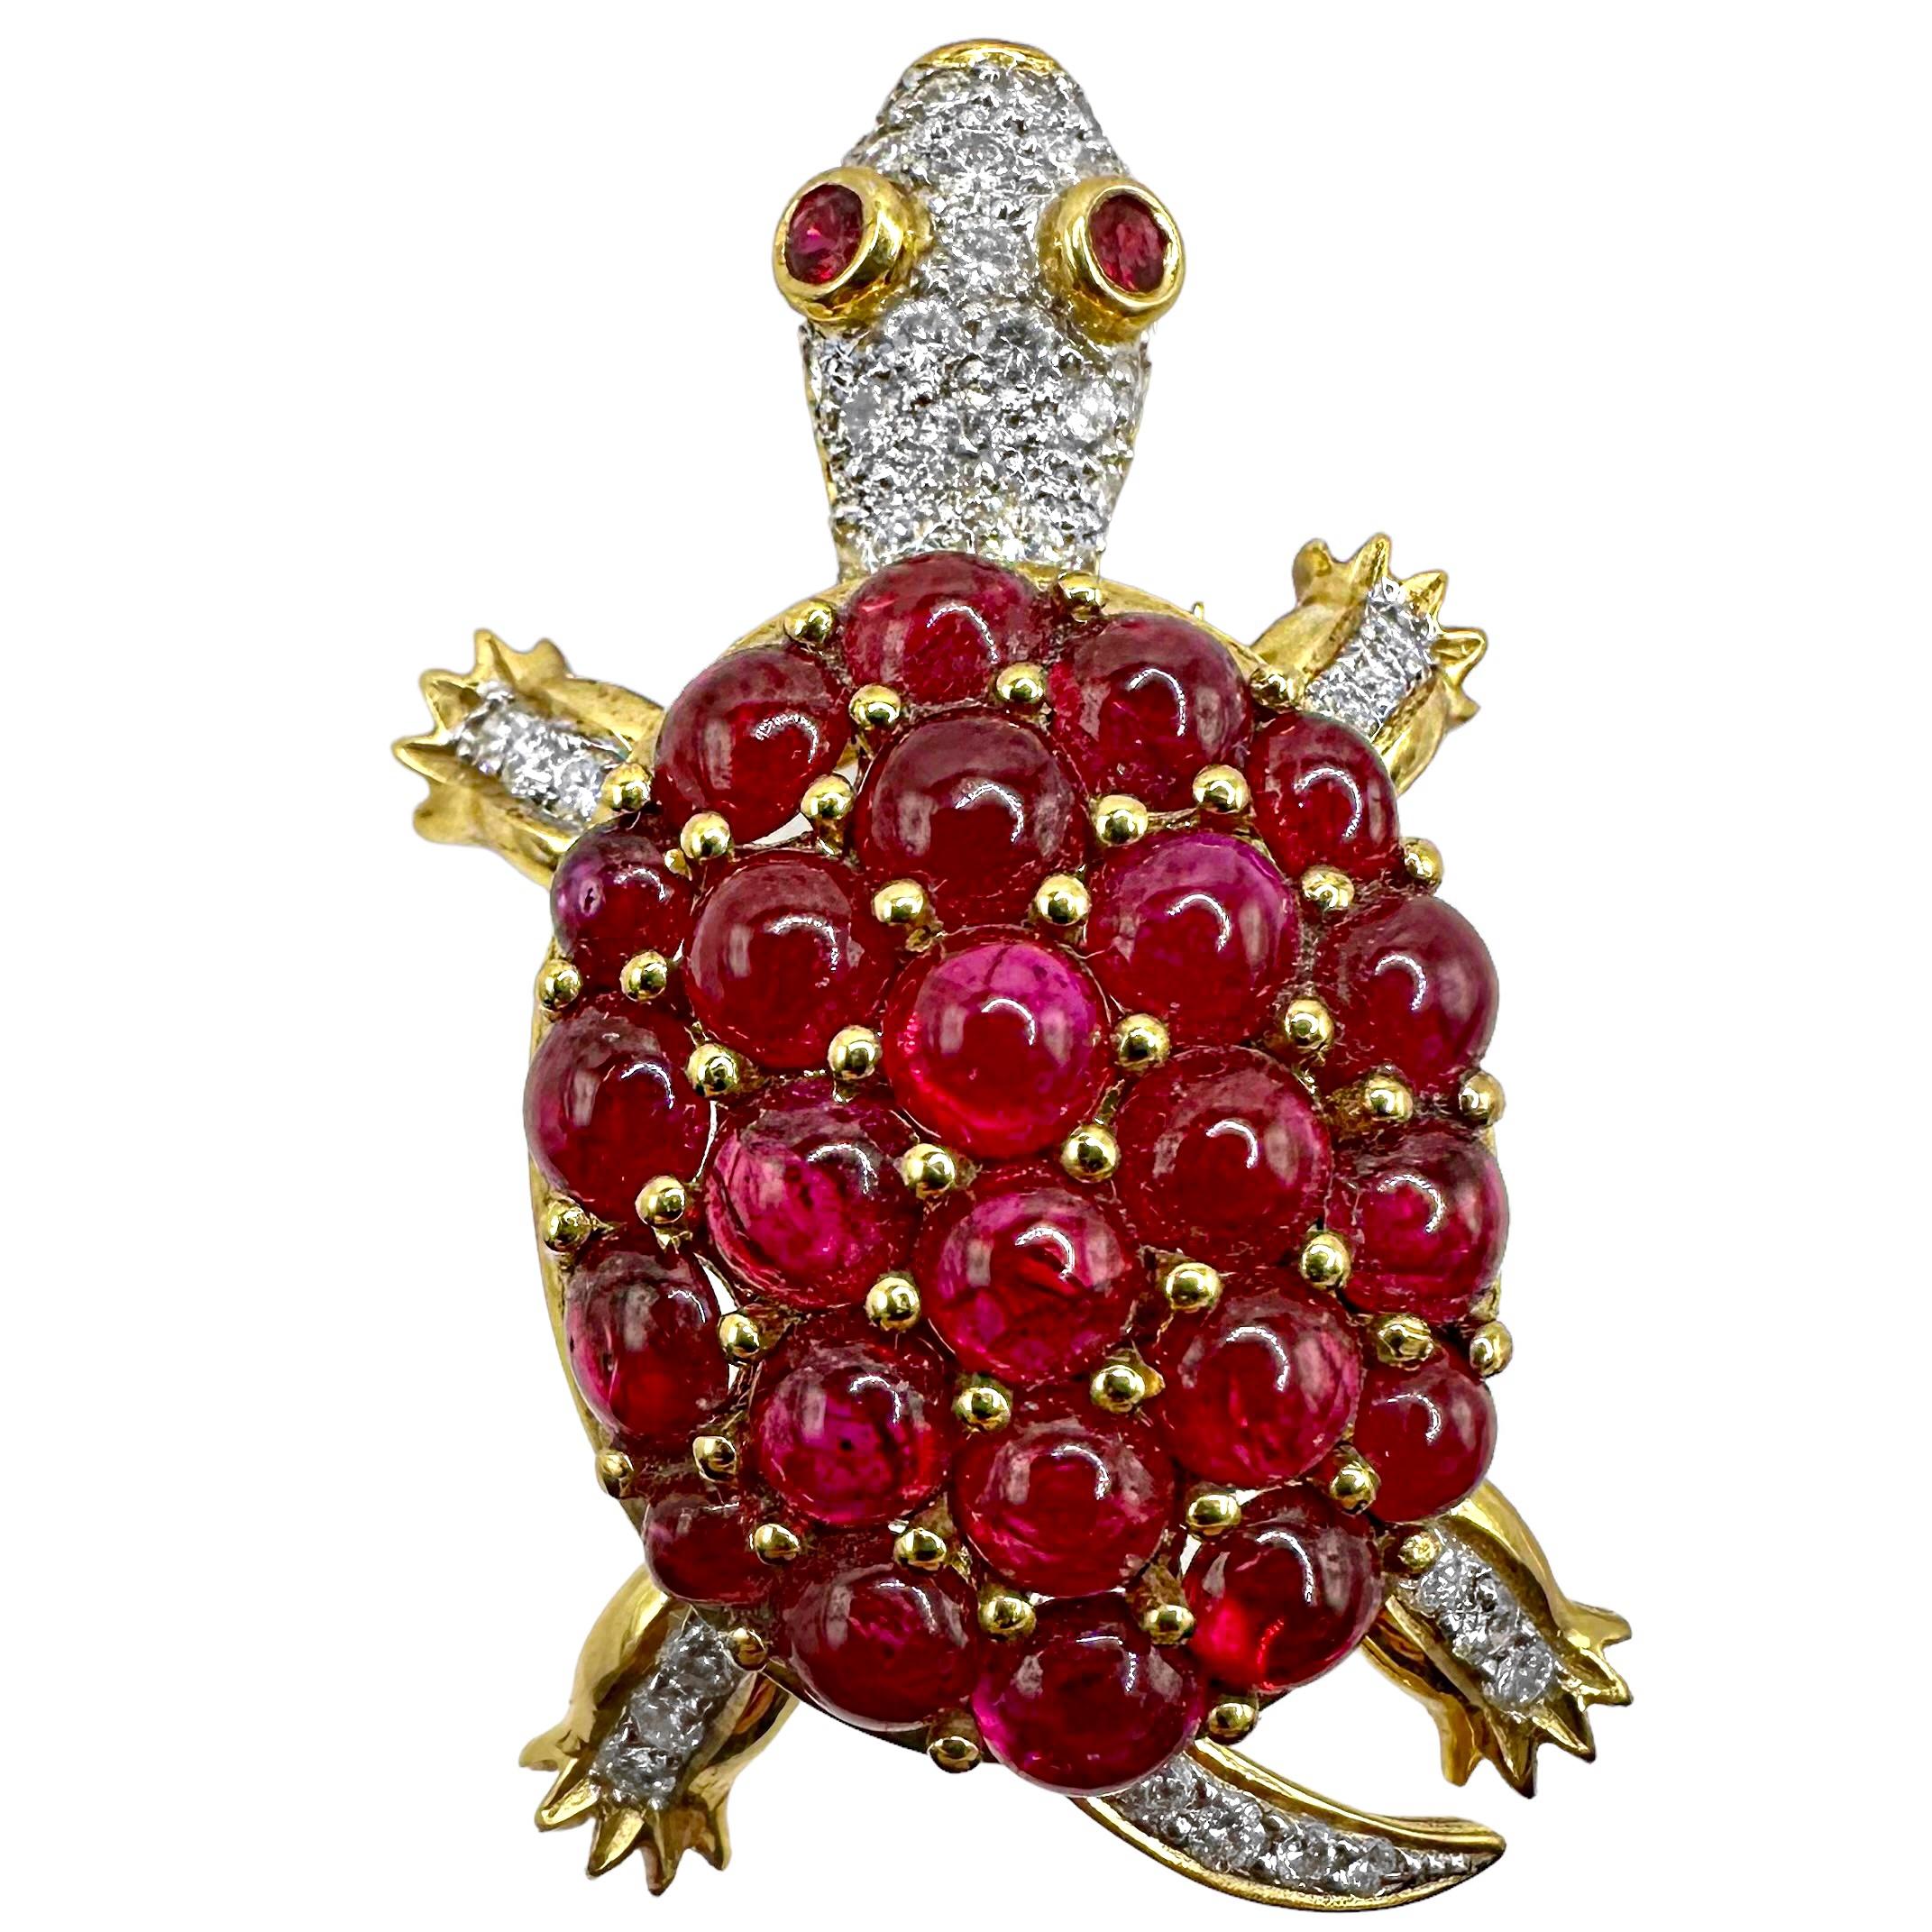 Adorable Turtle Brooch/Pendant with Motion in 18K Gold, Diamonds, and Rubies For Sale 10